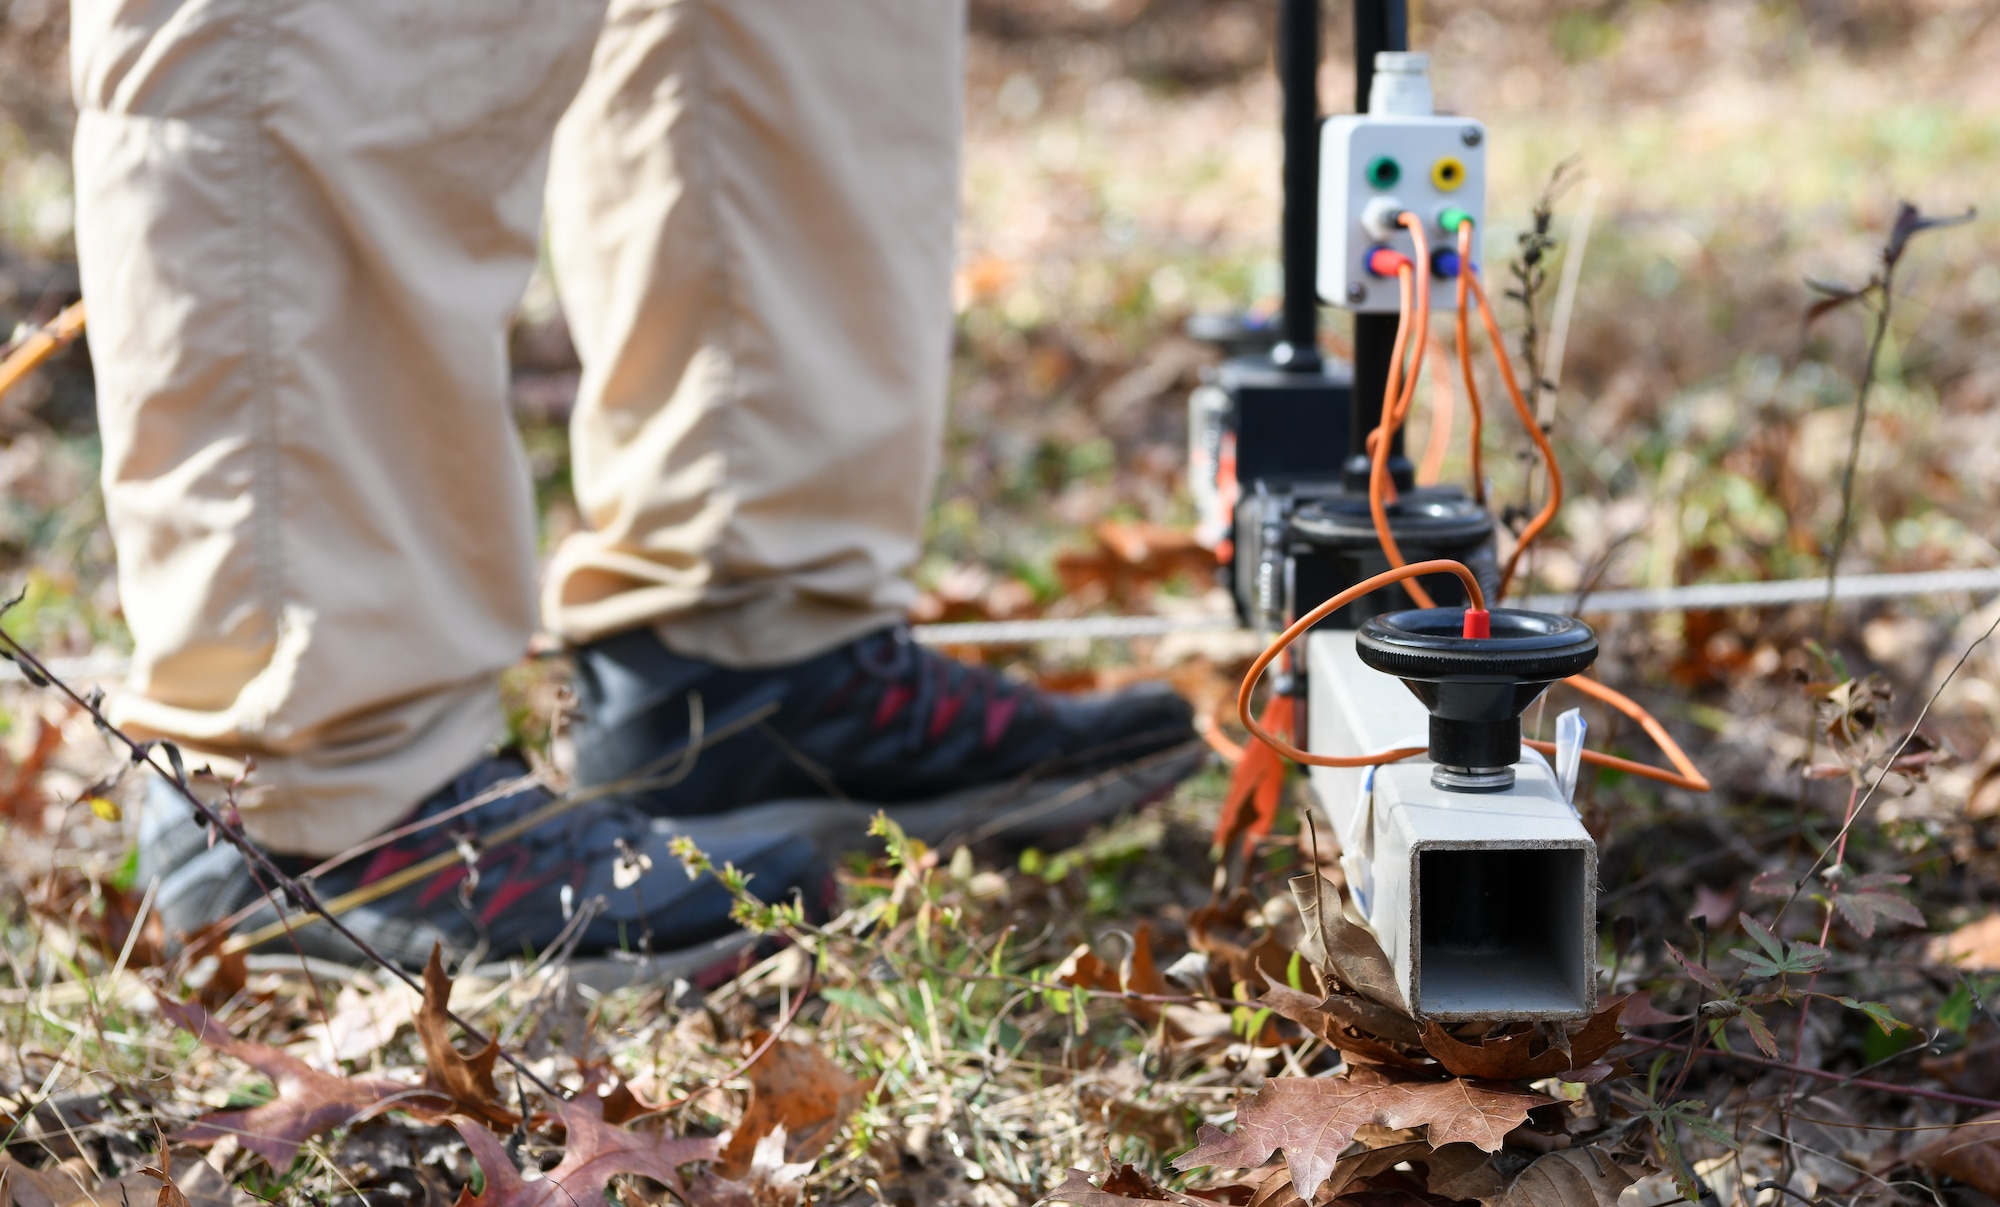 Steve Martin, an archaeologist who specializes in geophysics, uses an electrical resistance meter to survey the Chapel Hill Cemetery at Arnold Air Force Base, Tennessee, Nov. 10, 2022. (U.S. Air Force photo by Jill Pickett)